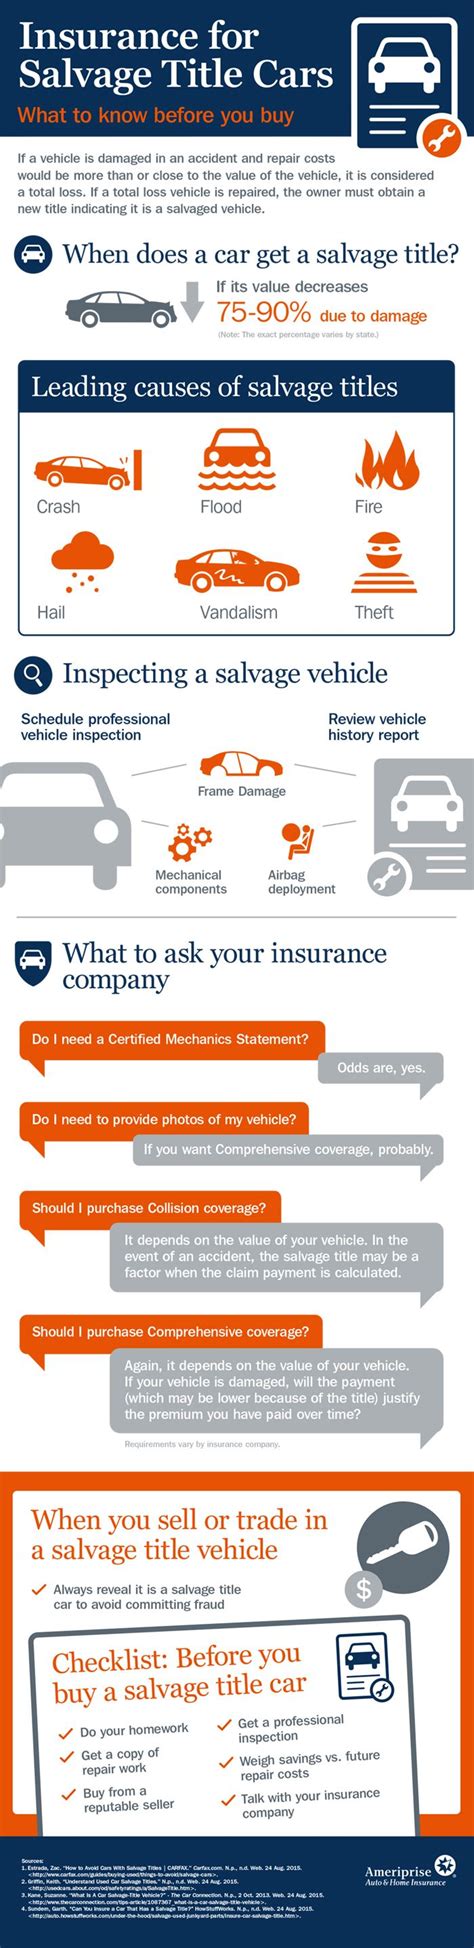 In my experience, cars can end up with 'salvage titles' for the dumbest reasons. Insurance for Salvage Title Cars | Social media, Viral marketing, Infographic